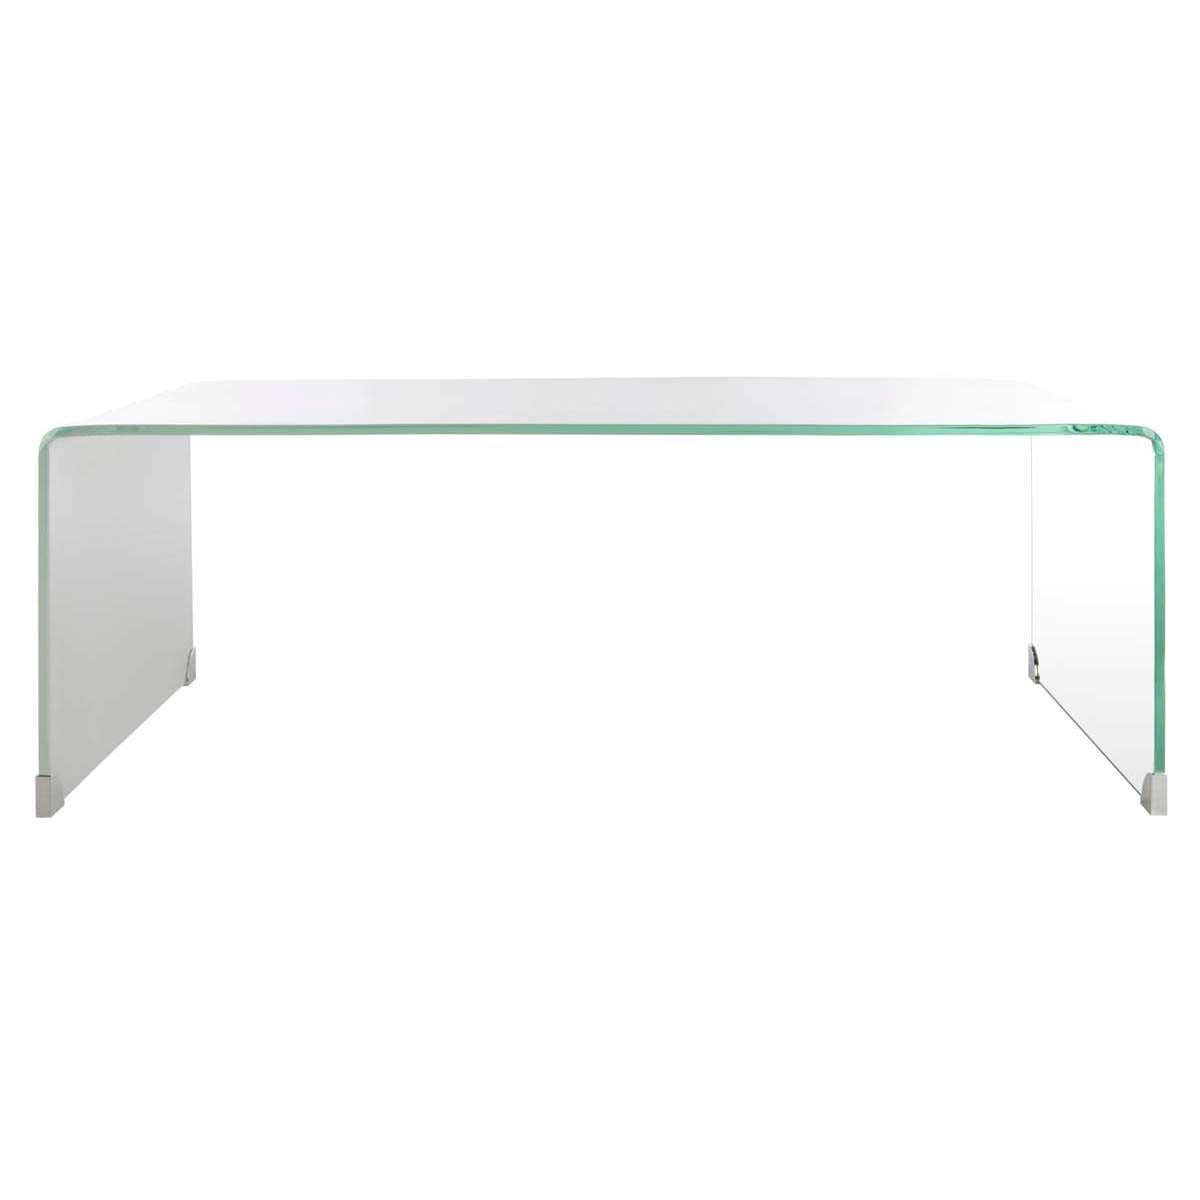 Safavieh Crysta Ombre Glass Coffee Table , COF7300 - Clear/White